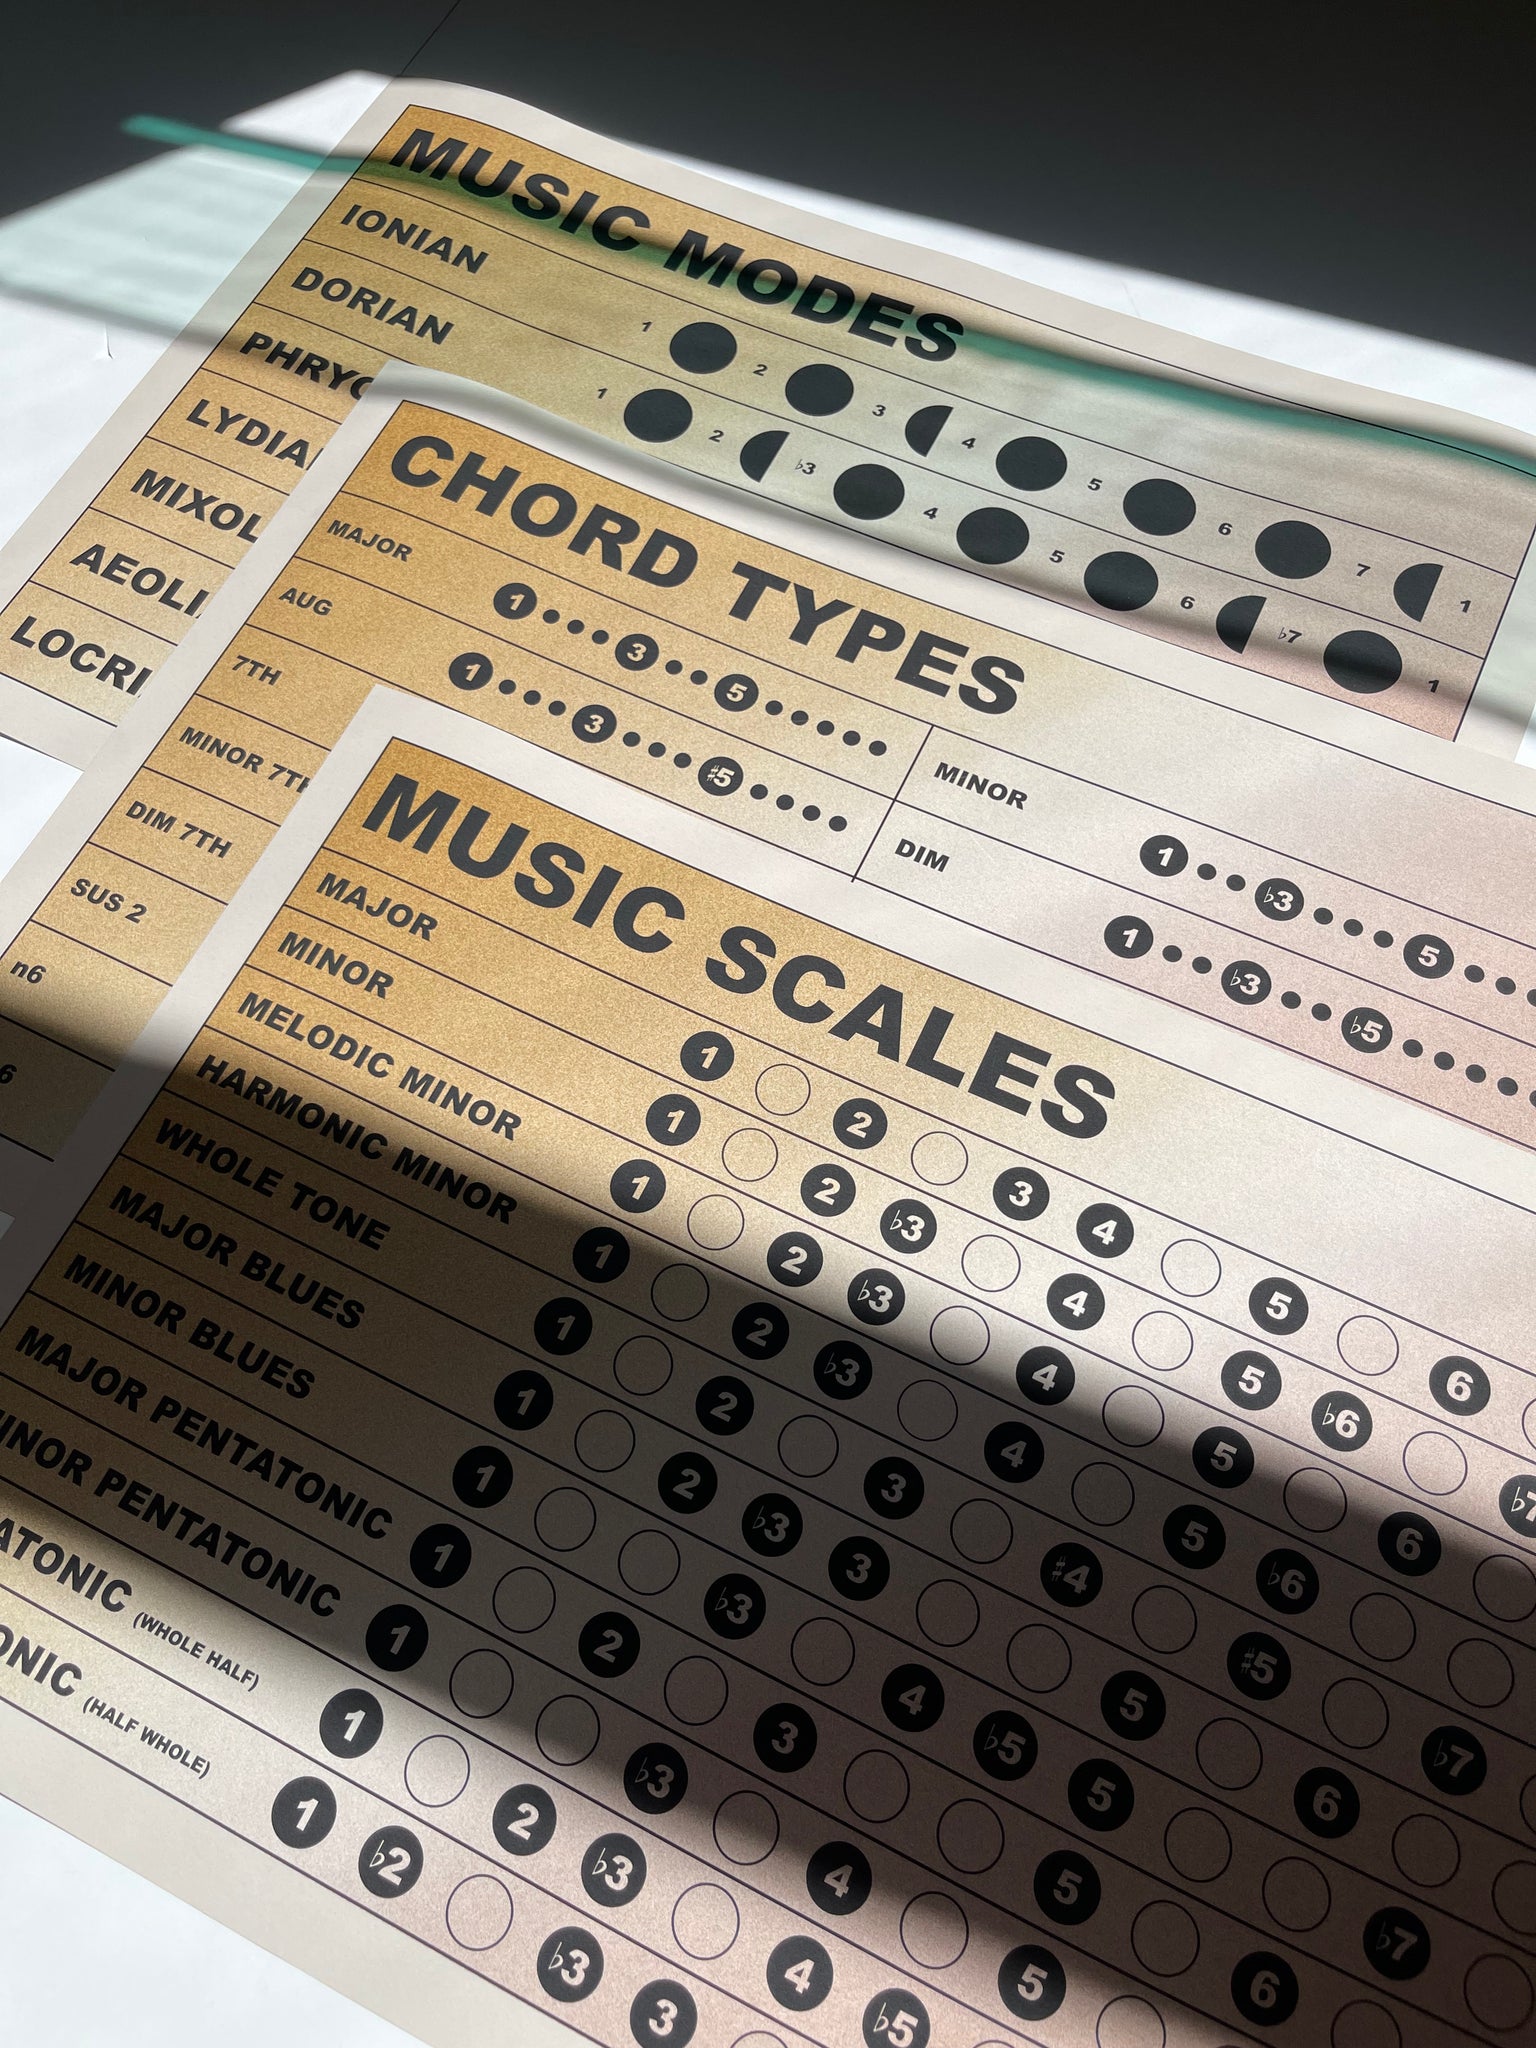 Music Scales Chart, Gradient Background